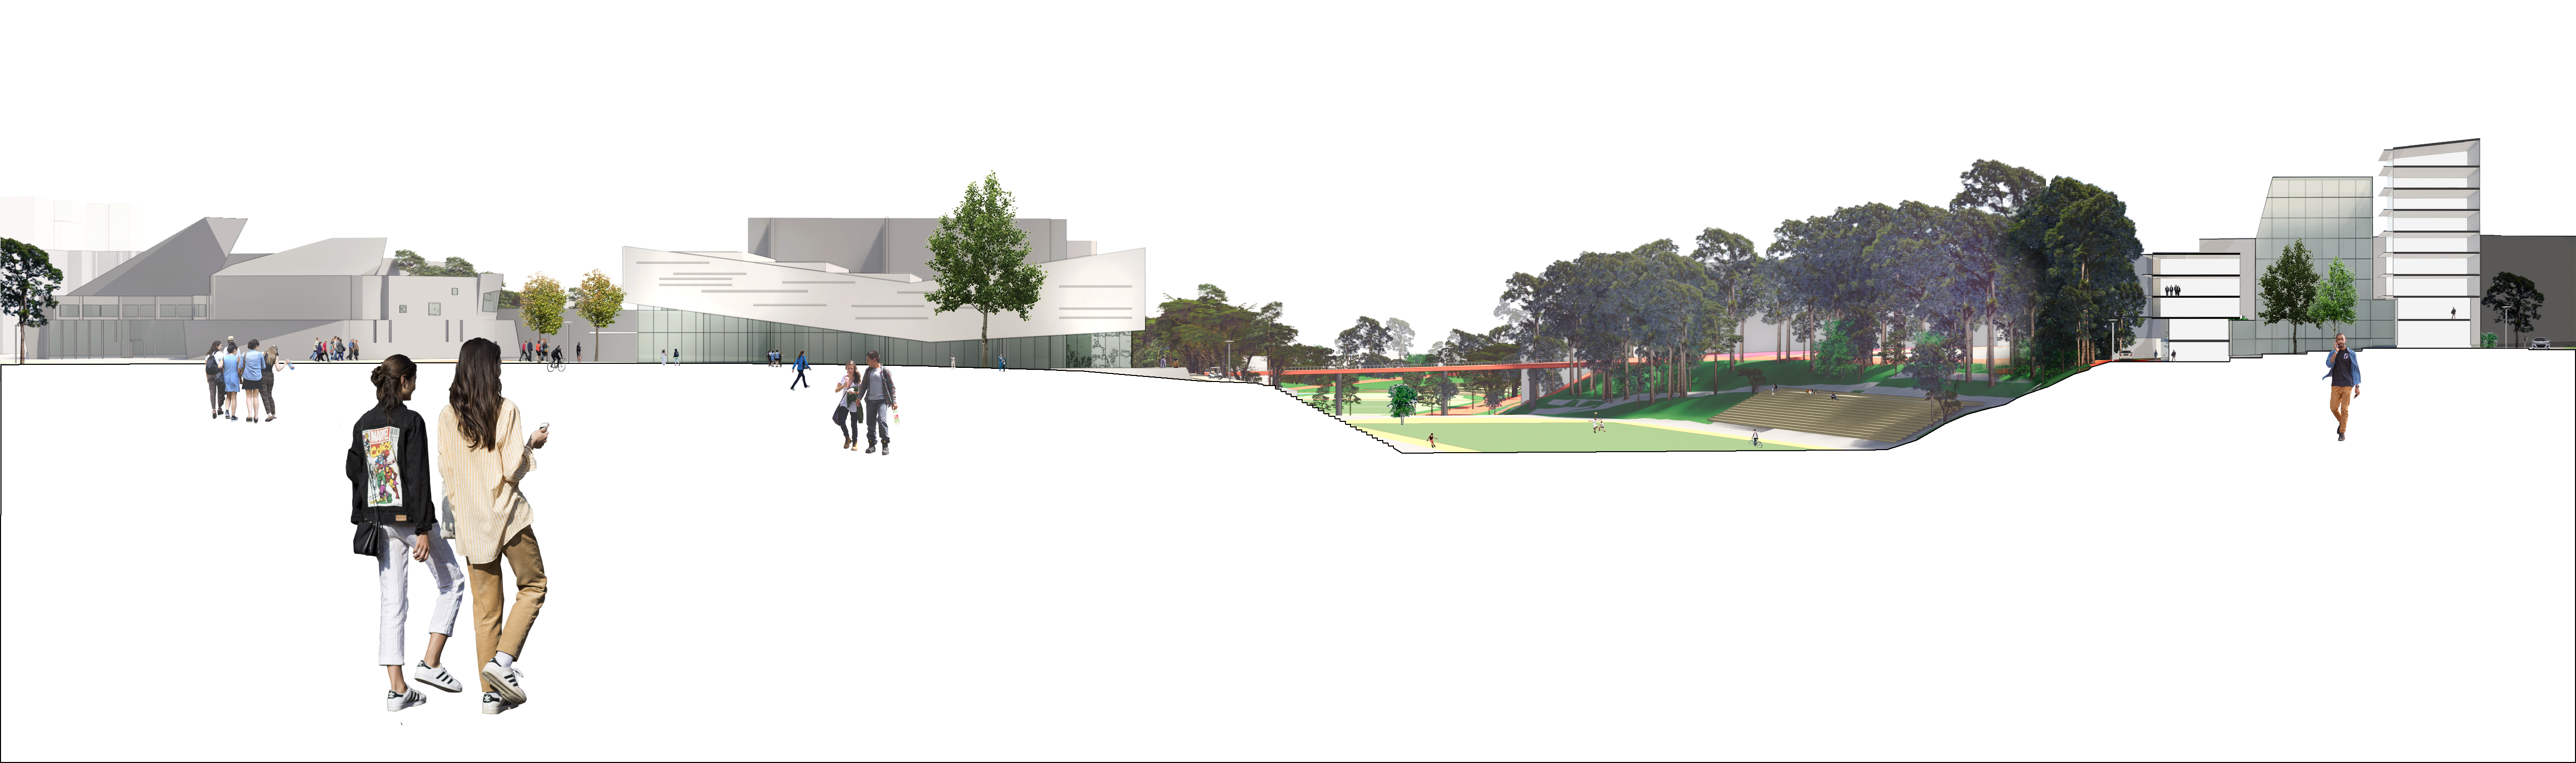 section showing new student center and valley